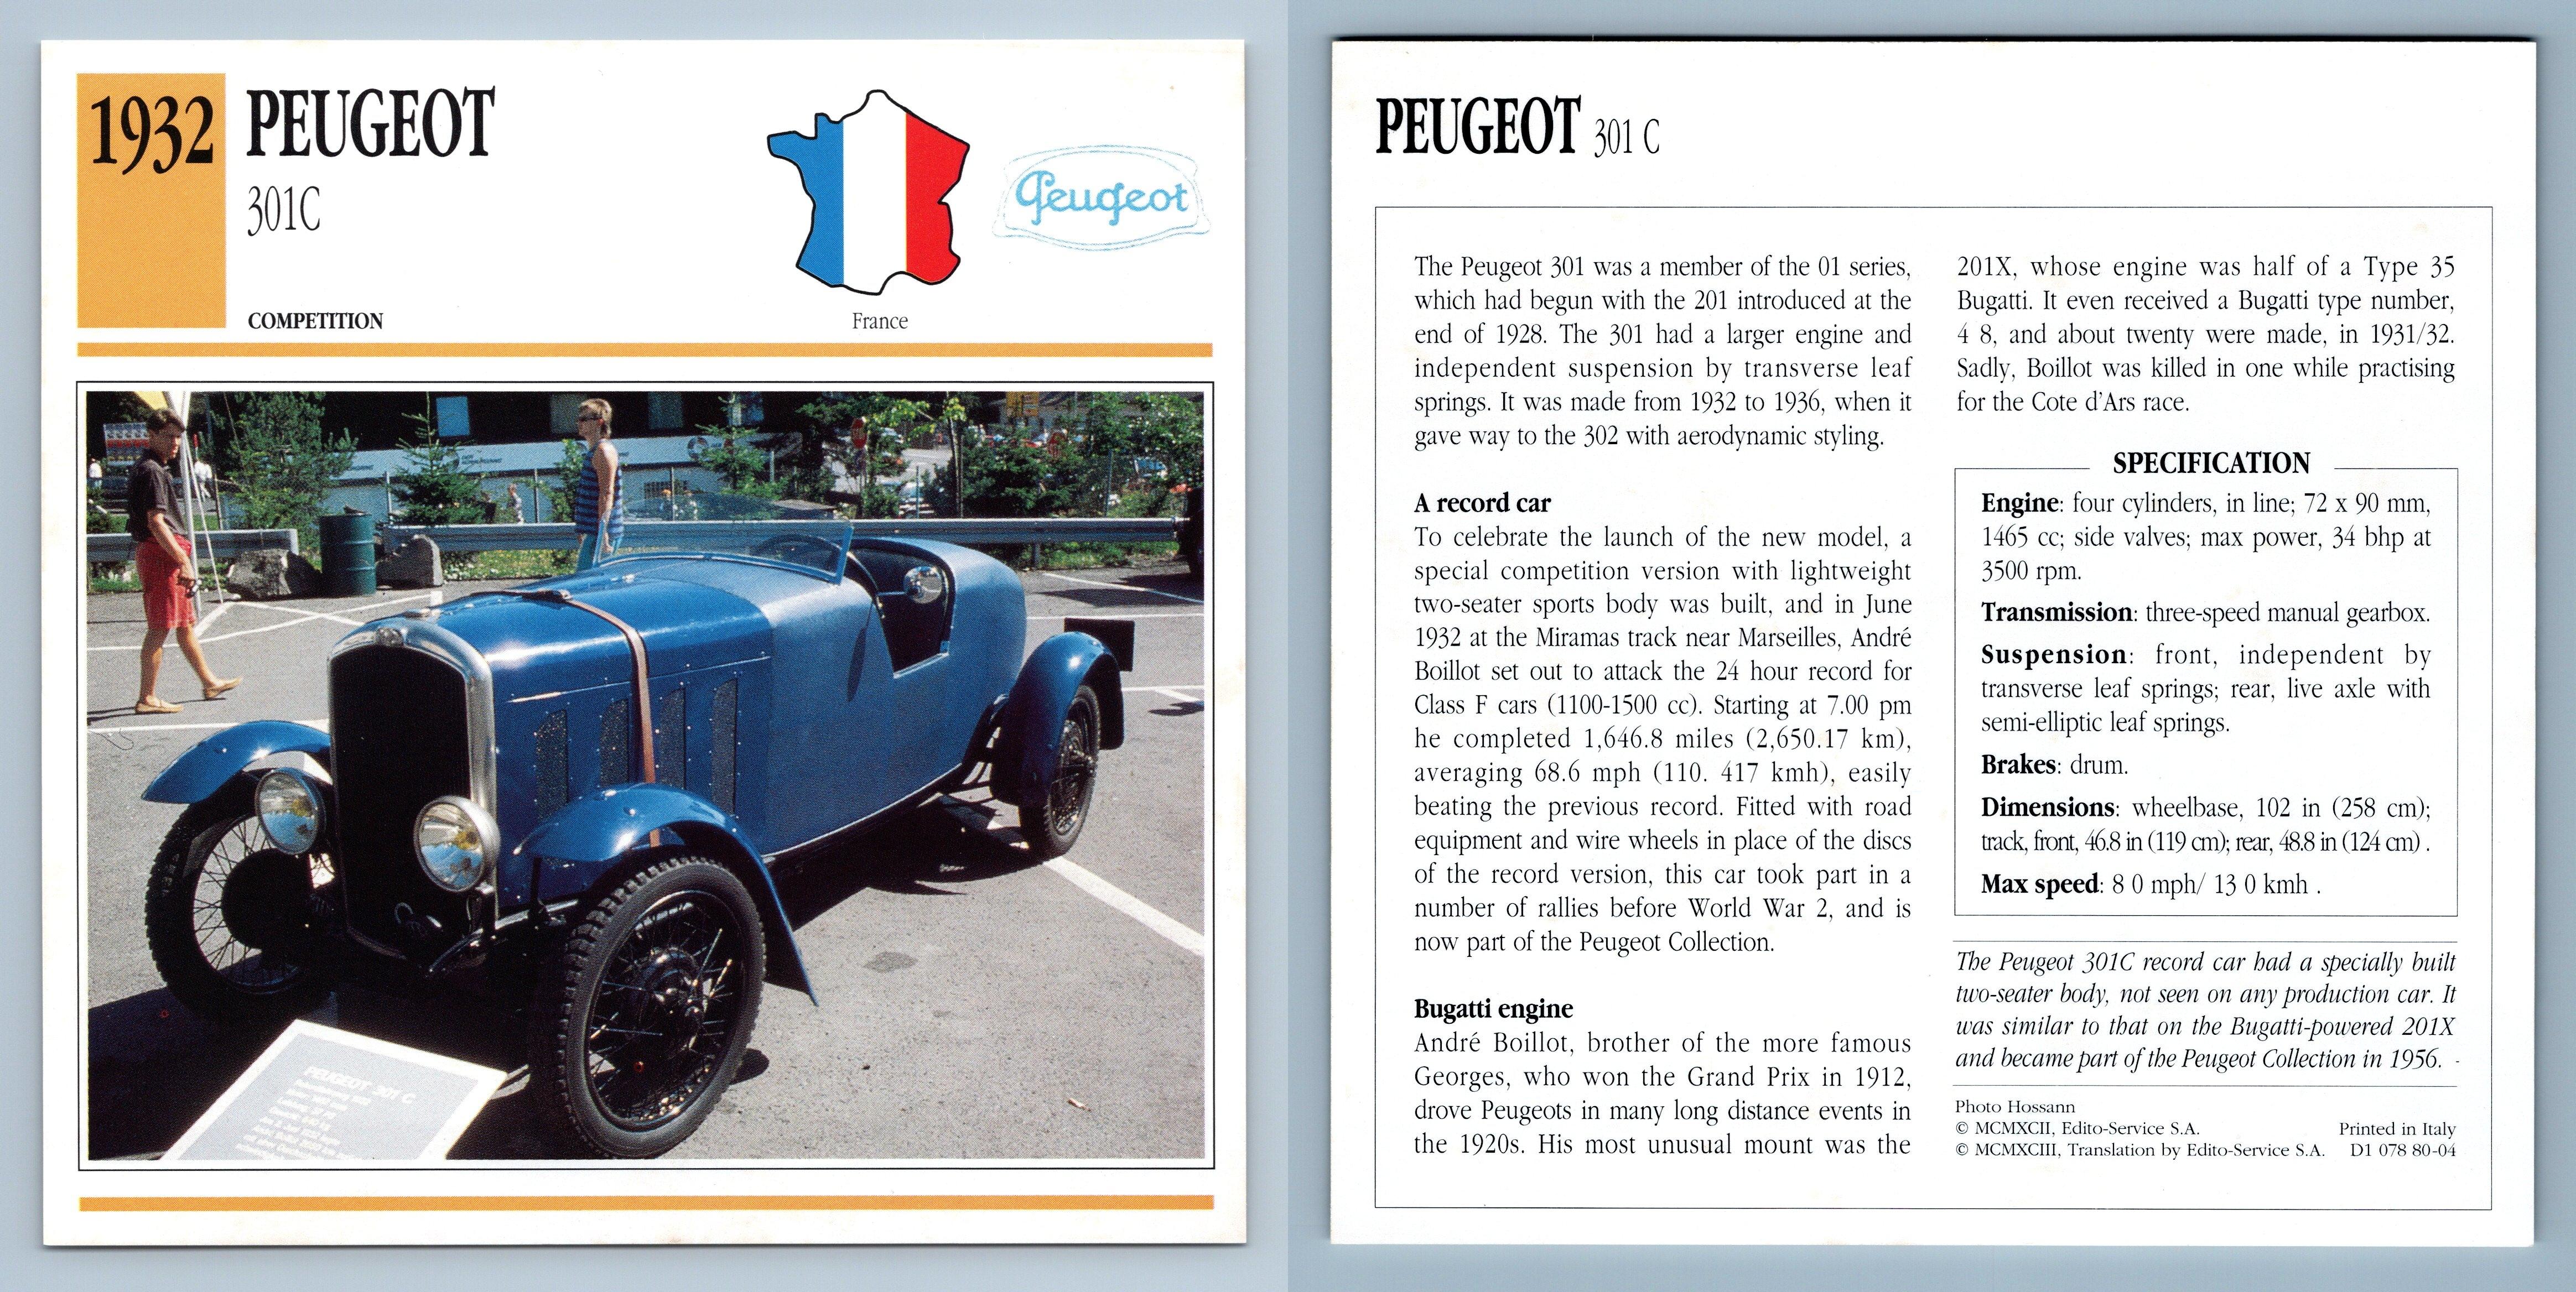 Peugeot - 301C - 1932 Competition Collectors Club Card